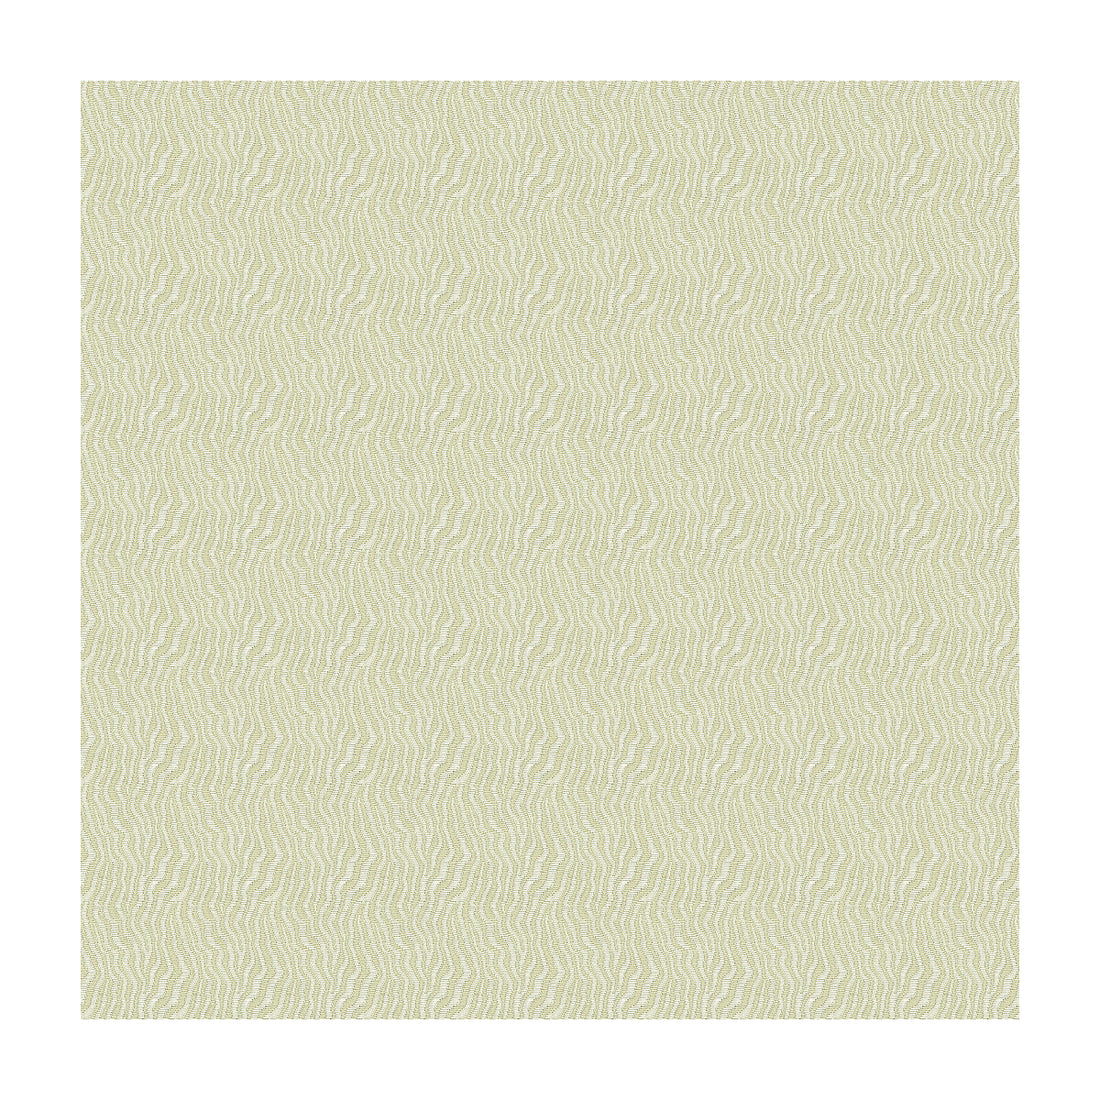 Kf Smt Jentry fabric in pearl color - pattern 27968.111.0 - by Kravet Smart in the Candice Olson collection